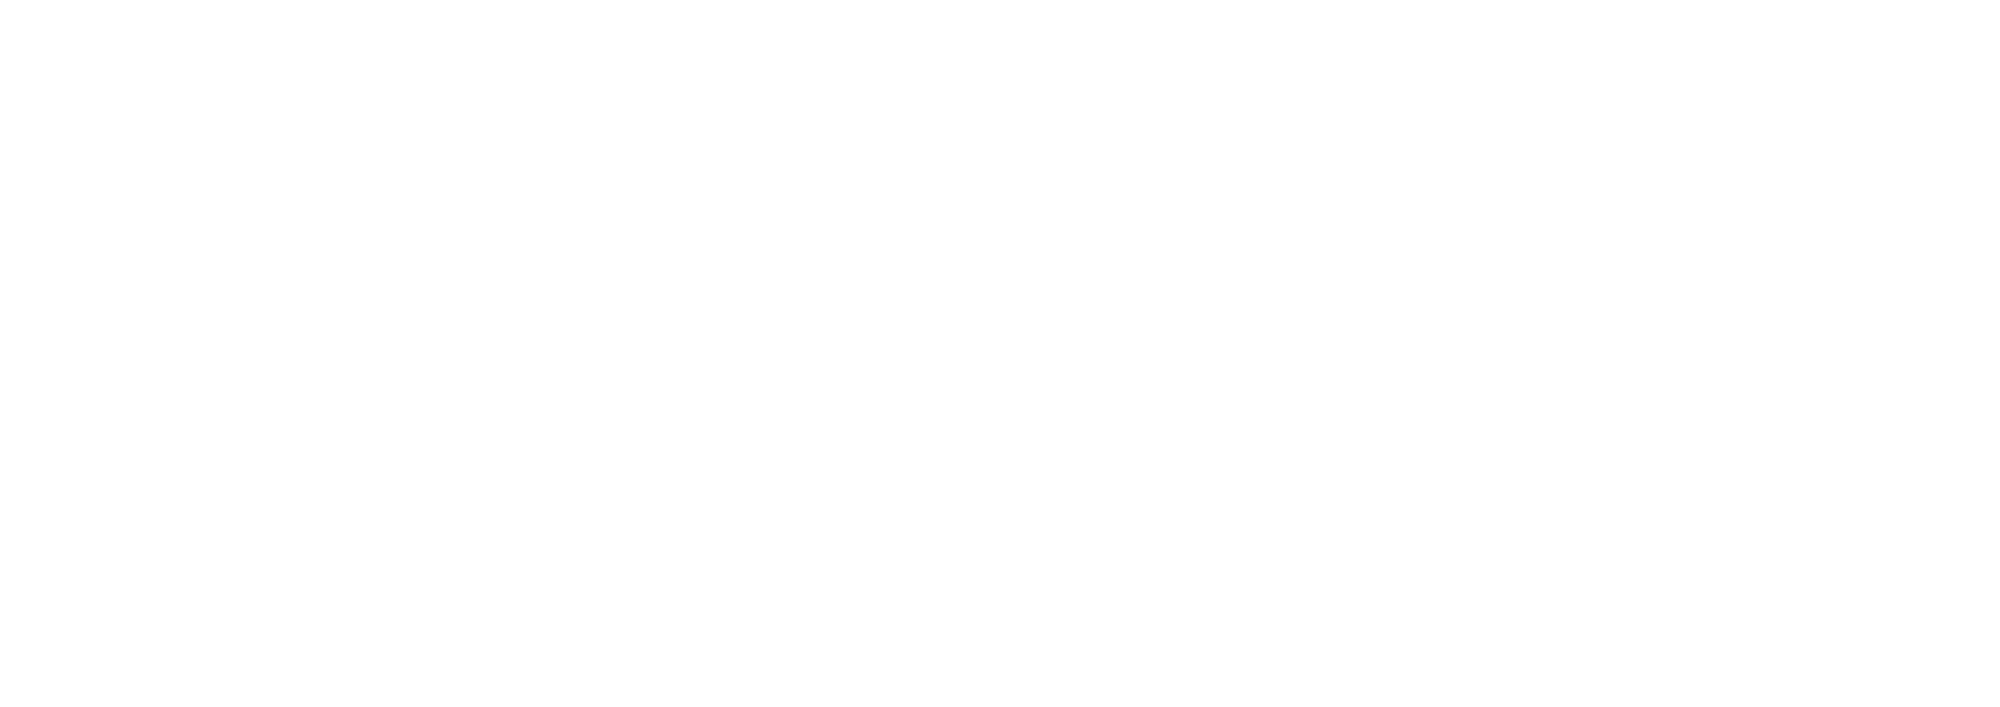 online-recruiting-icon-pattern